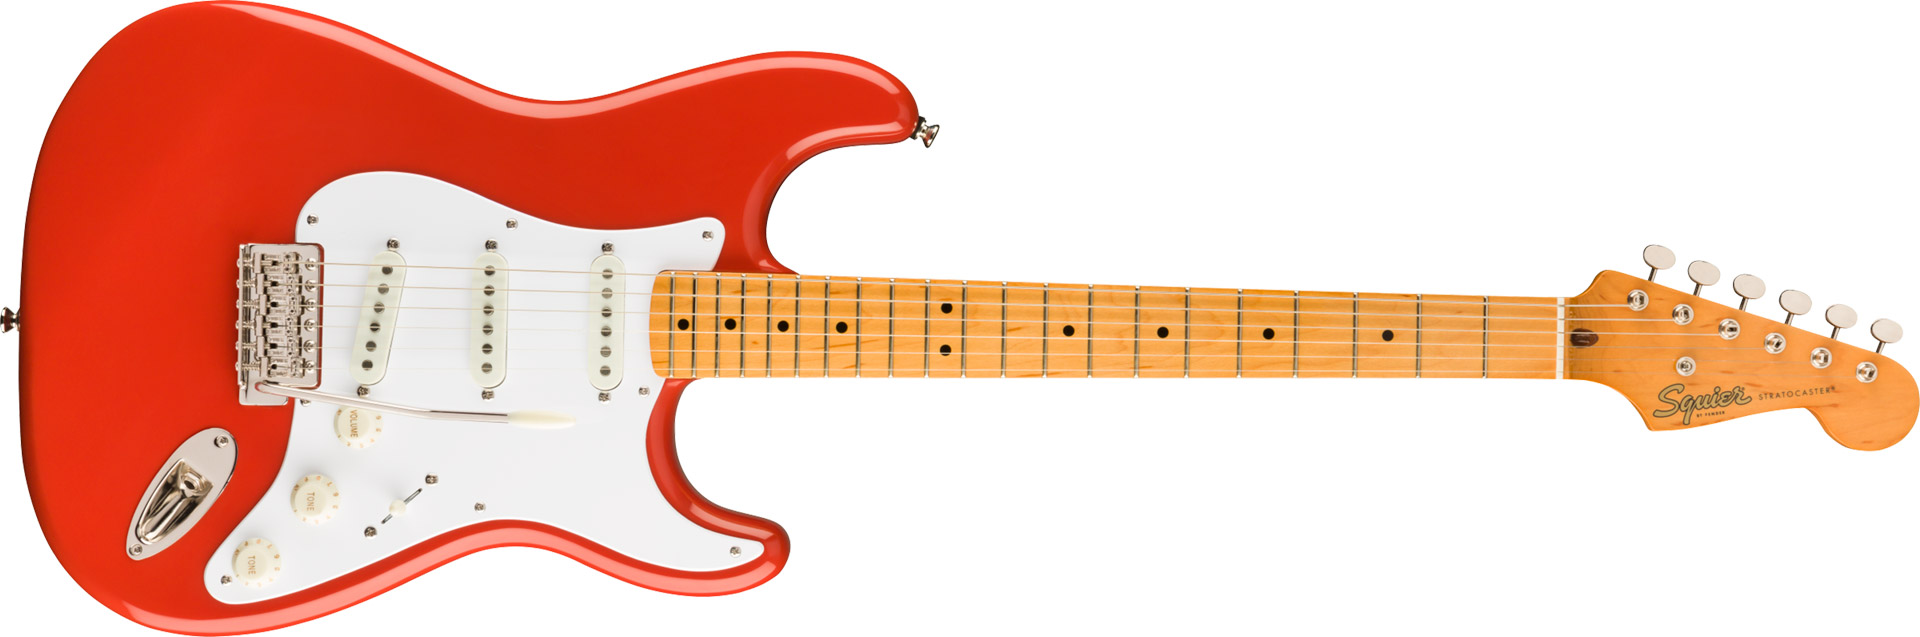 GUITARRA FENDER SQUIER CLASSIC VIBE 50S STRATOCASTER MN - 037-4005-540 - FIESTA RED